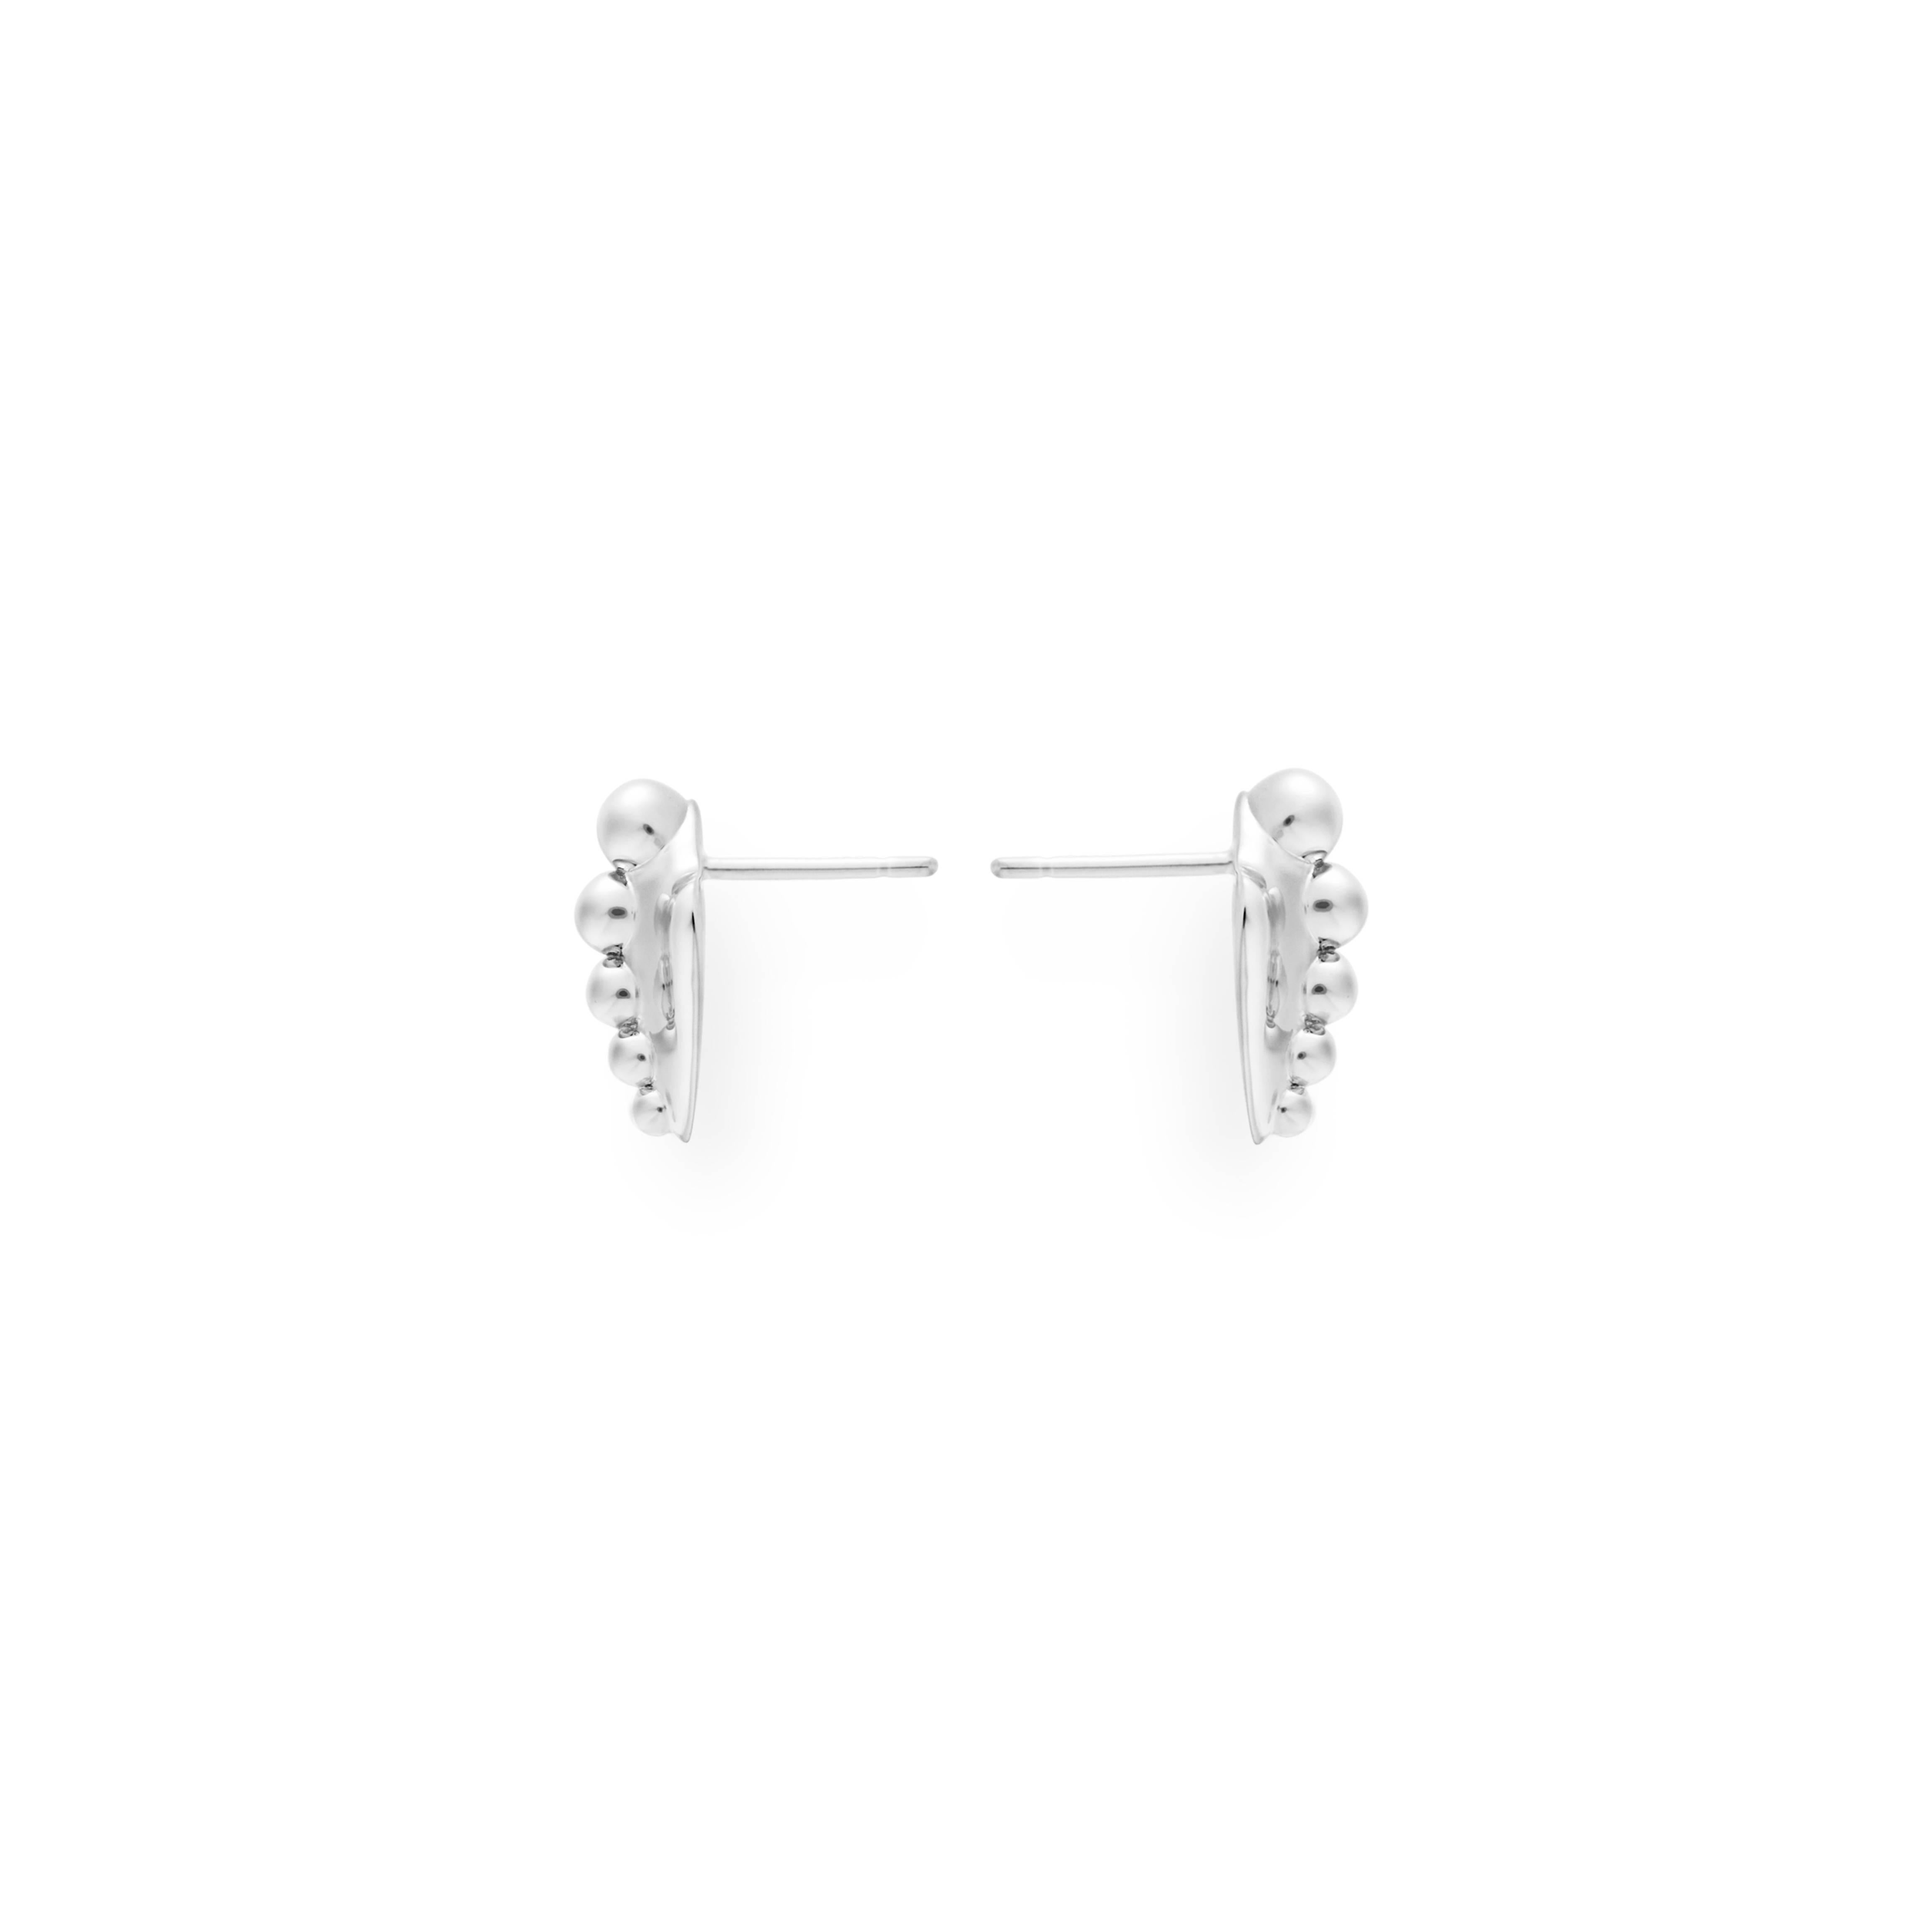 Mistova's sterling silver ball spine earrings are shield shaped with highly polished surface with small spheres. Available in gold and silver.